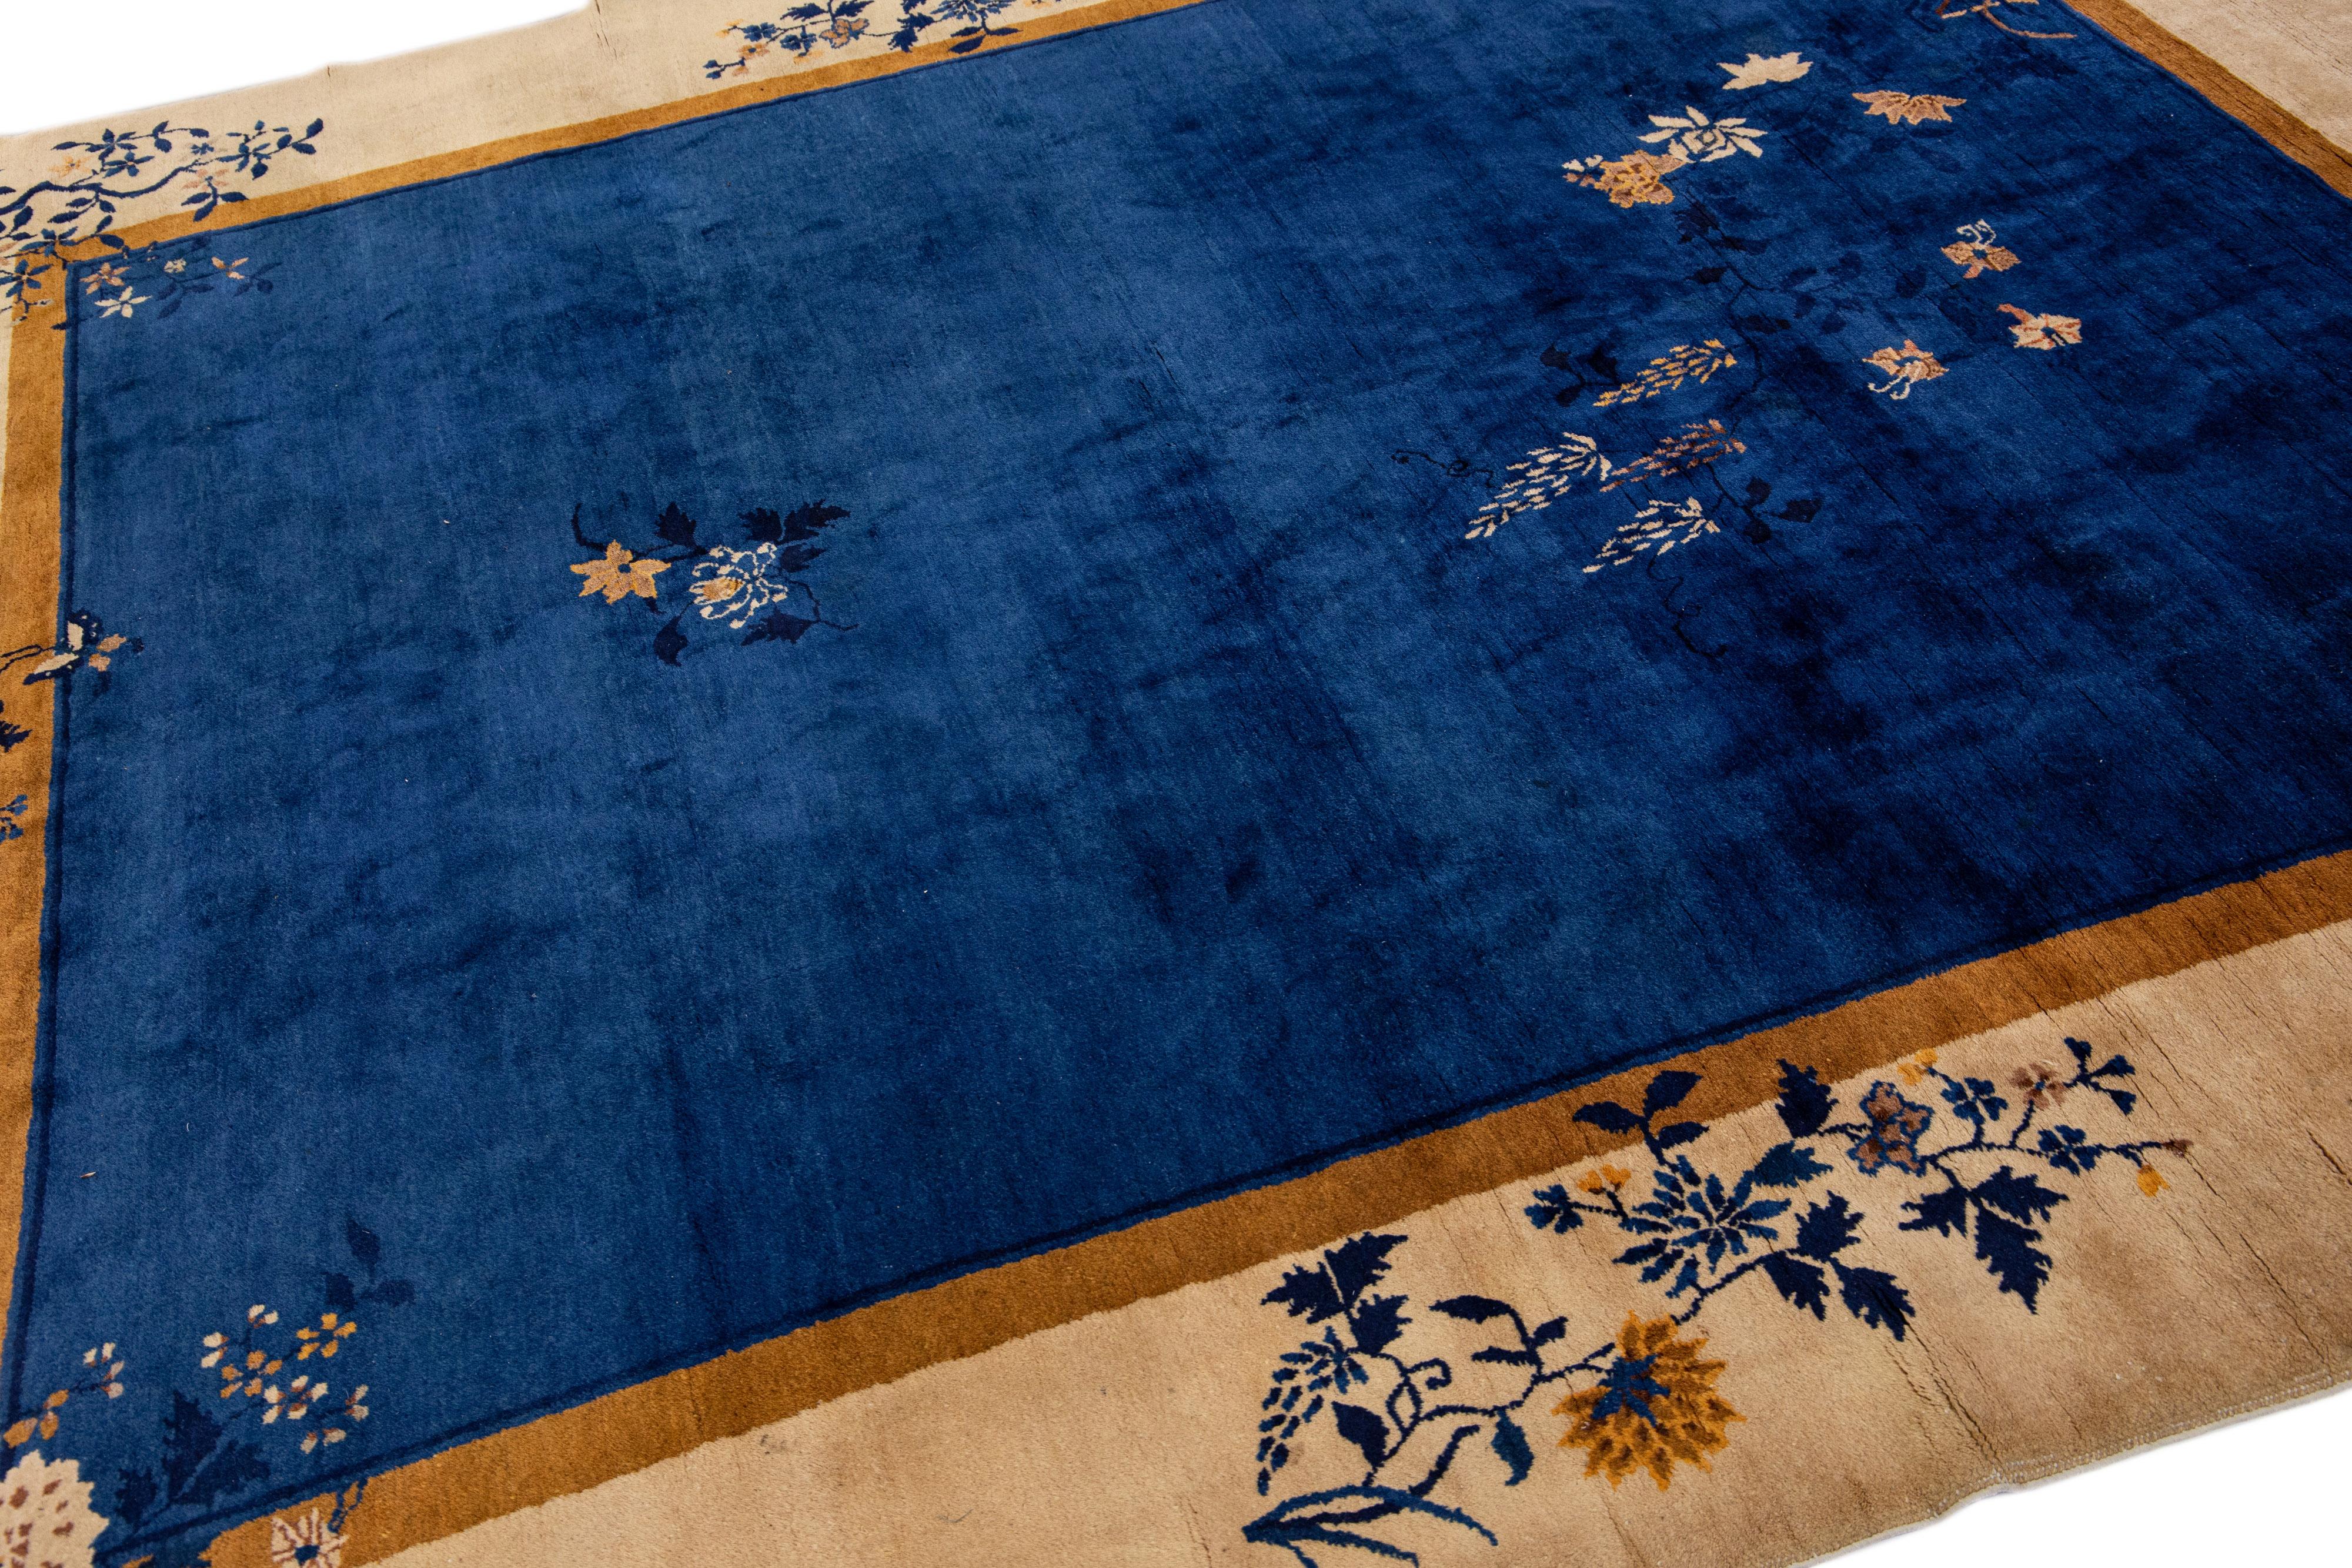 Antique Art Deco Handmade Beige and Blue Chinese Wool Rug with Floral Design For Sale 2